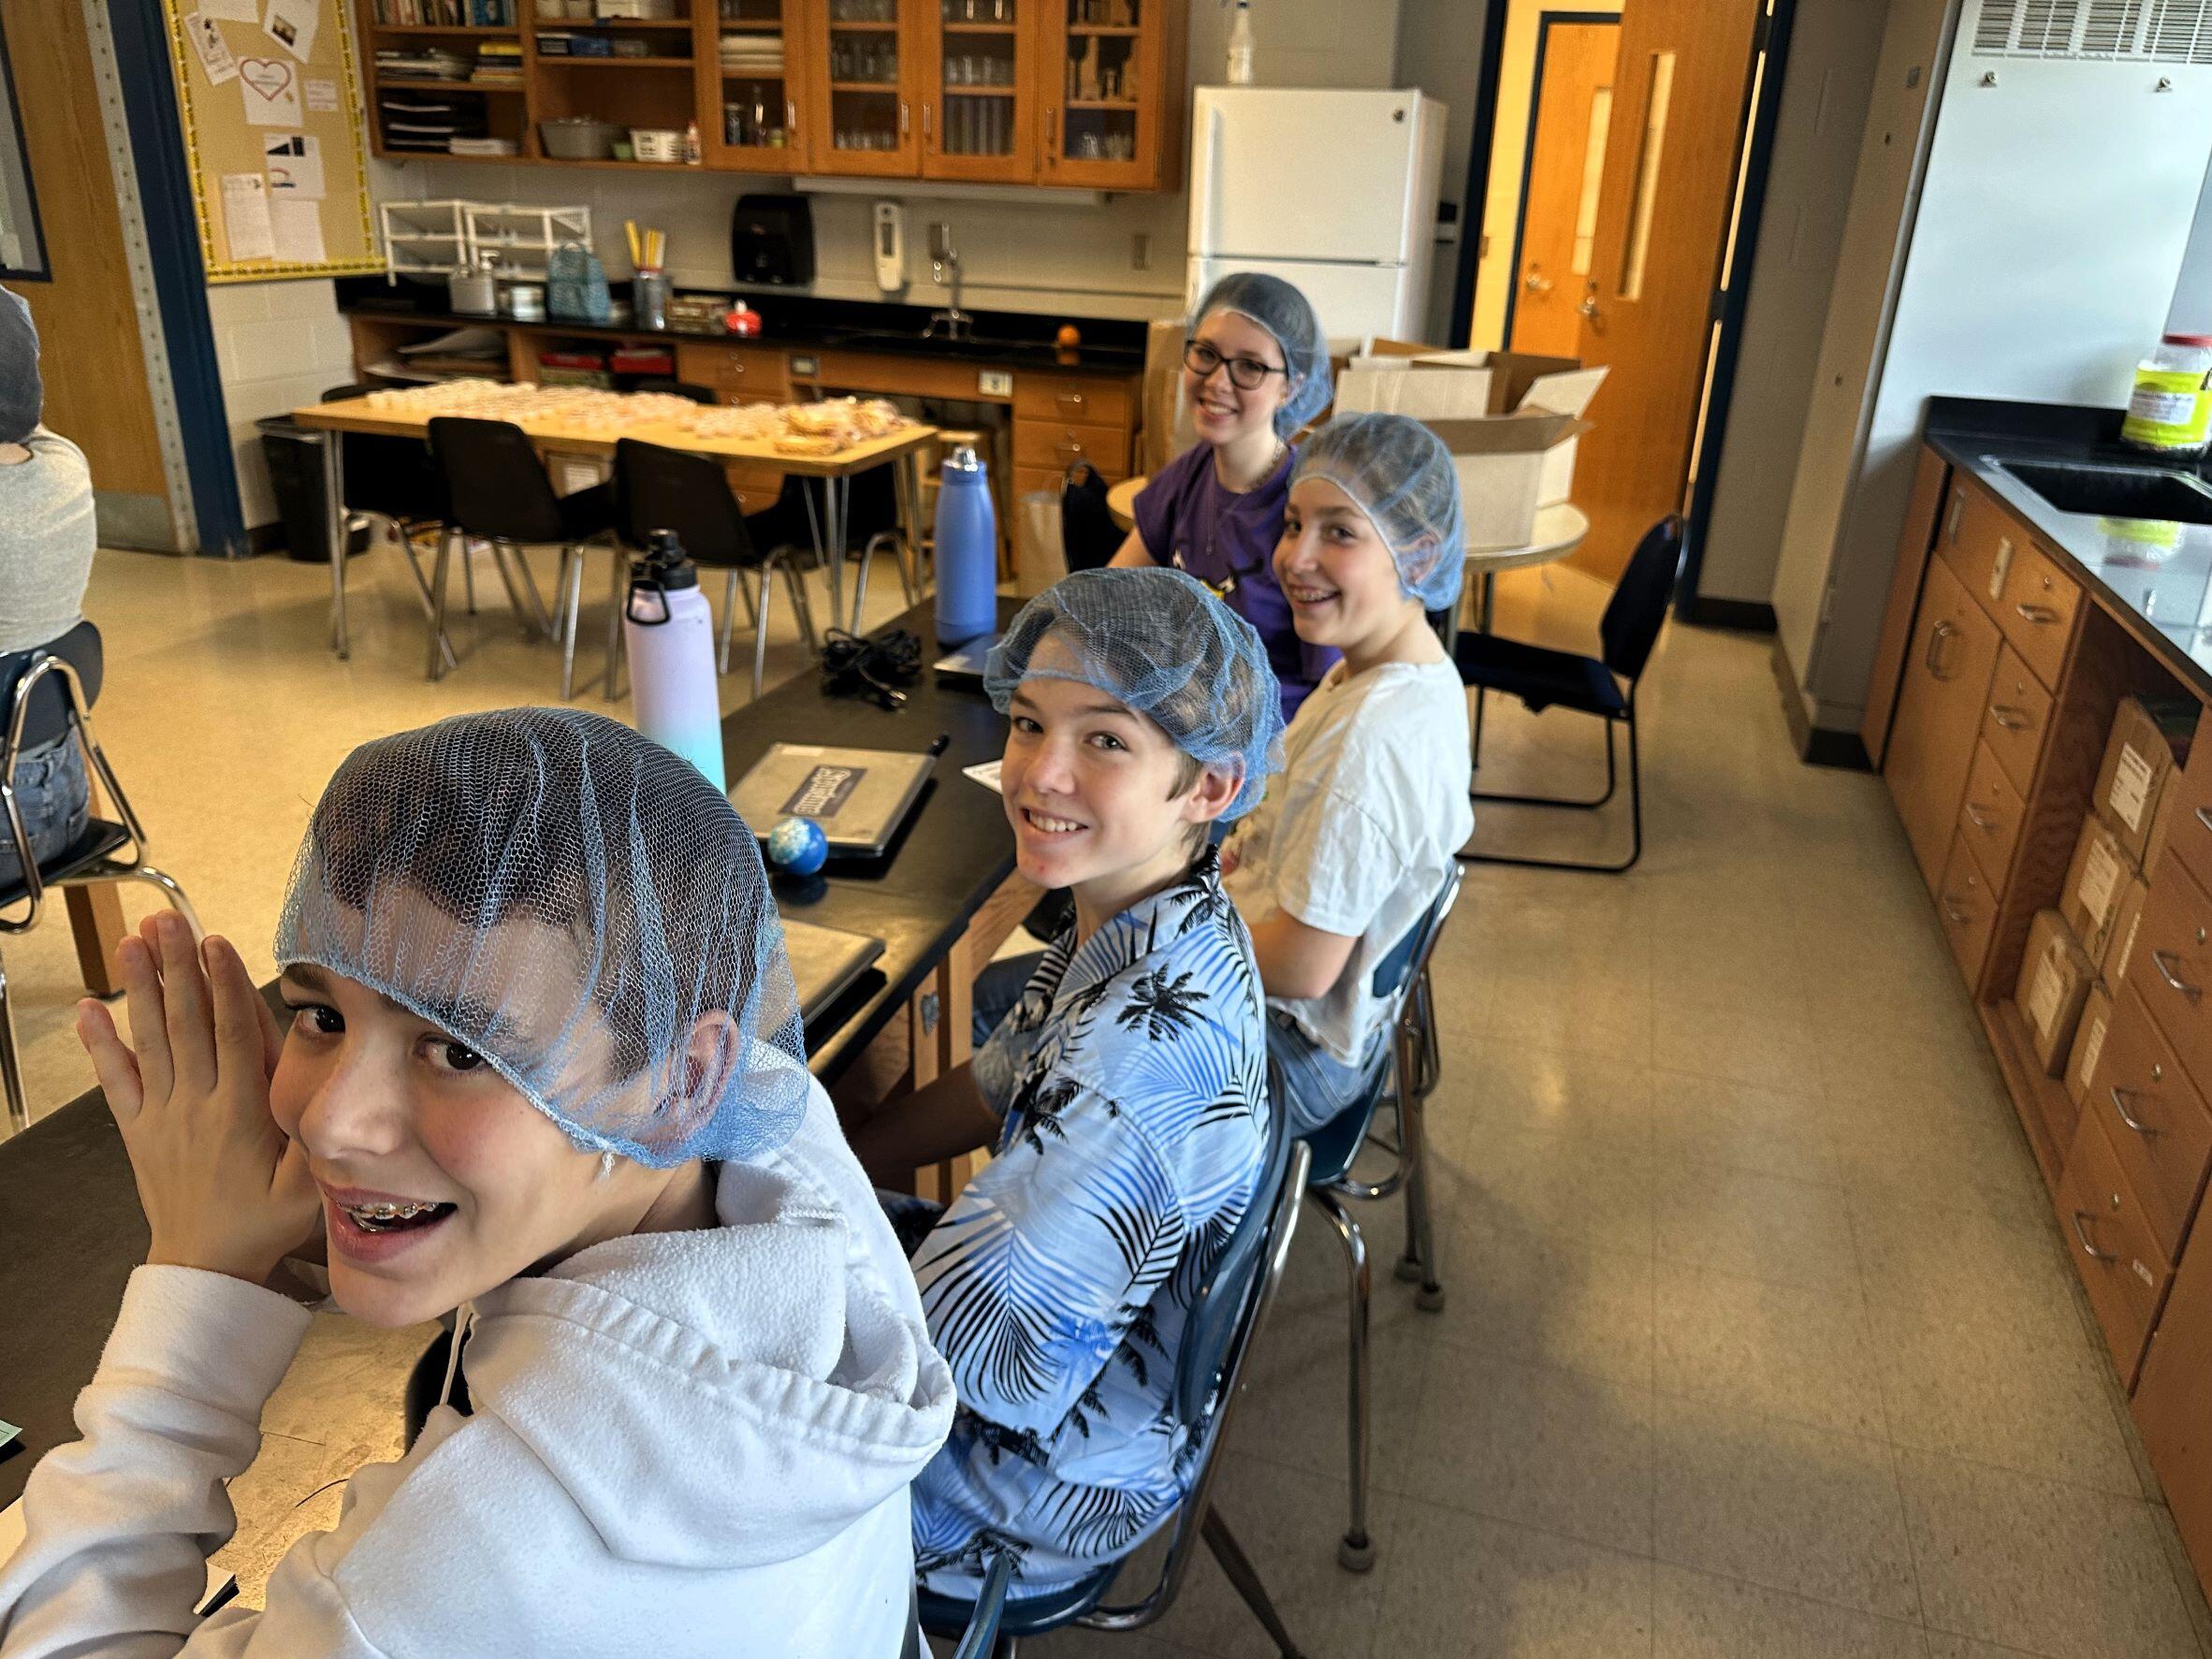 MS- students wearing a hairnet during science class